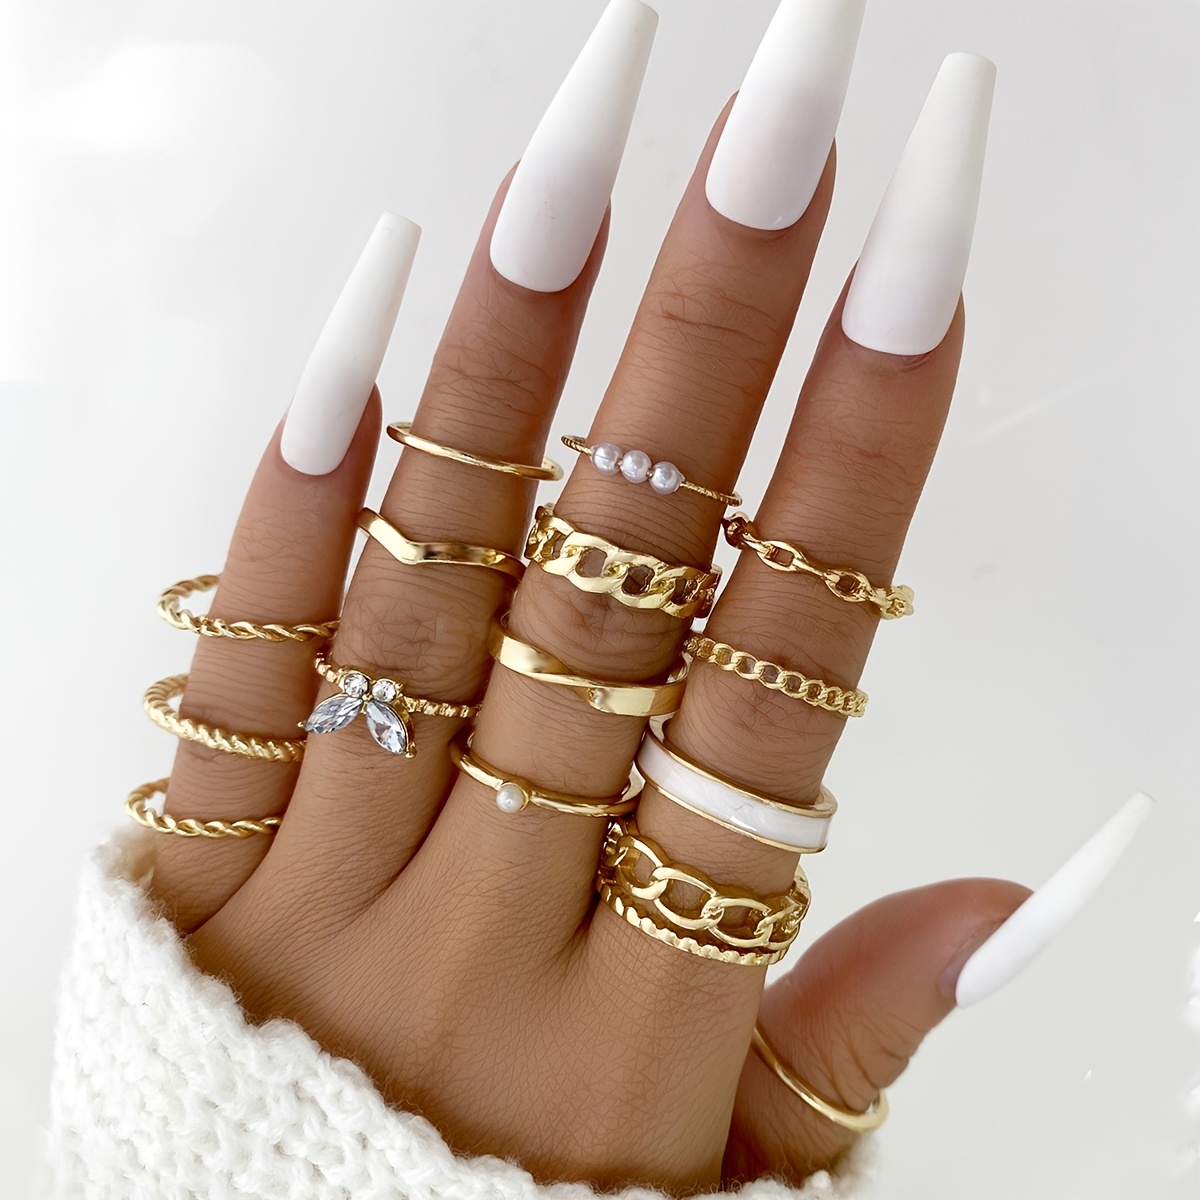 Boho Knuckle Rings Set Gold Joint Knuckle Rings Crystal Midi Size Stackable  Finger Rings Hand Accessories For Women And Girls 17pcs